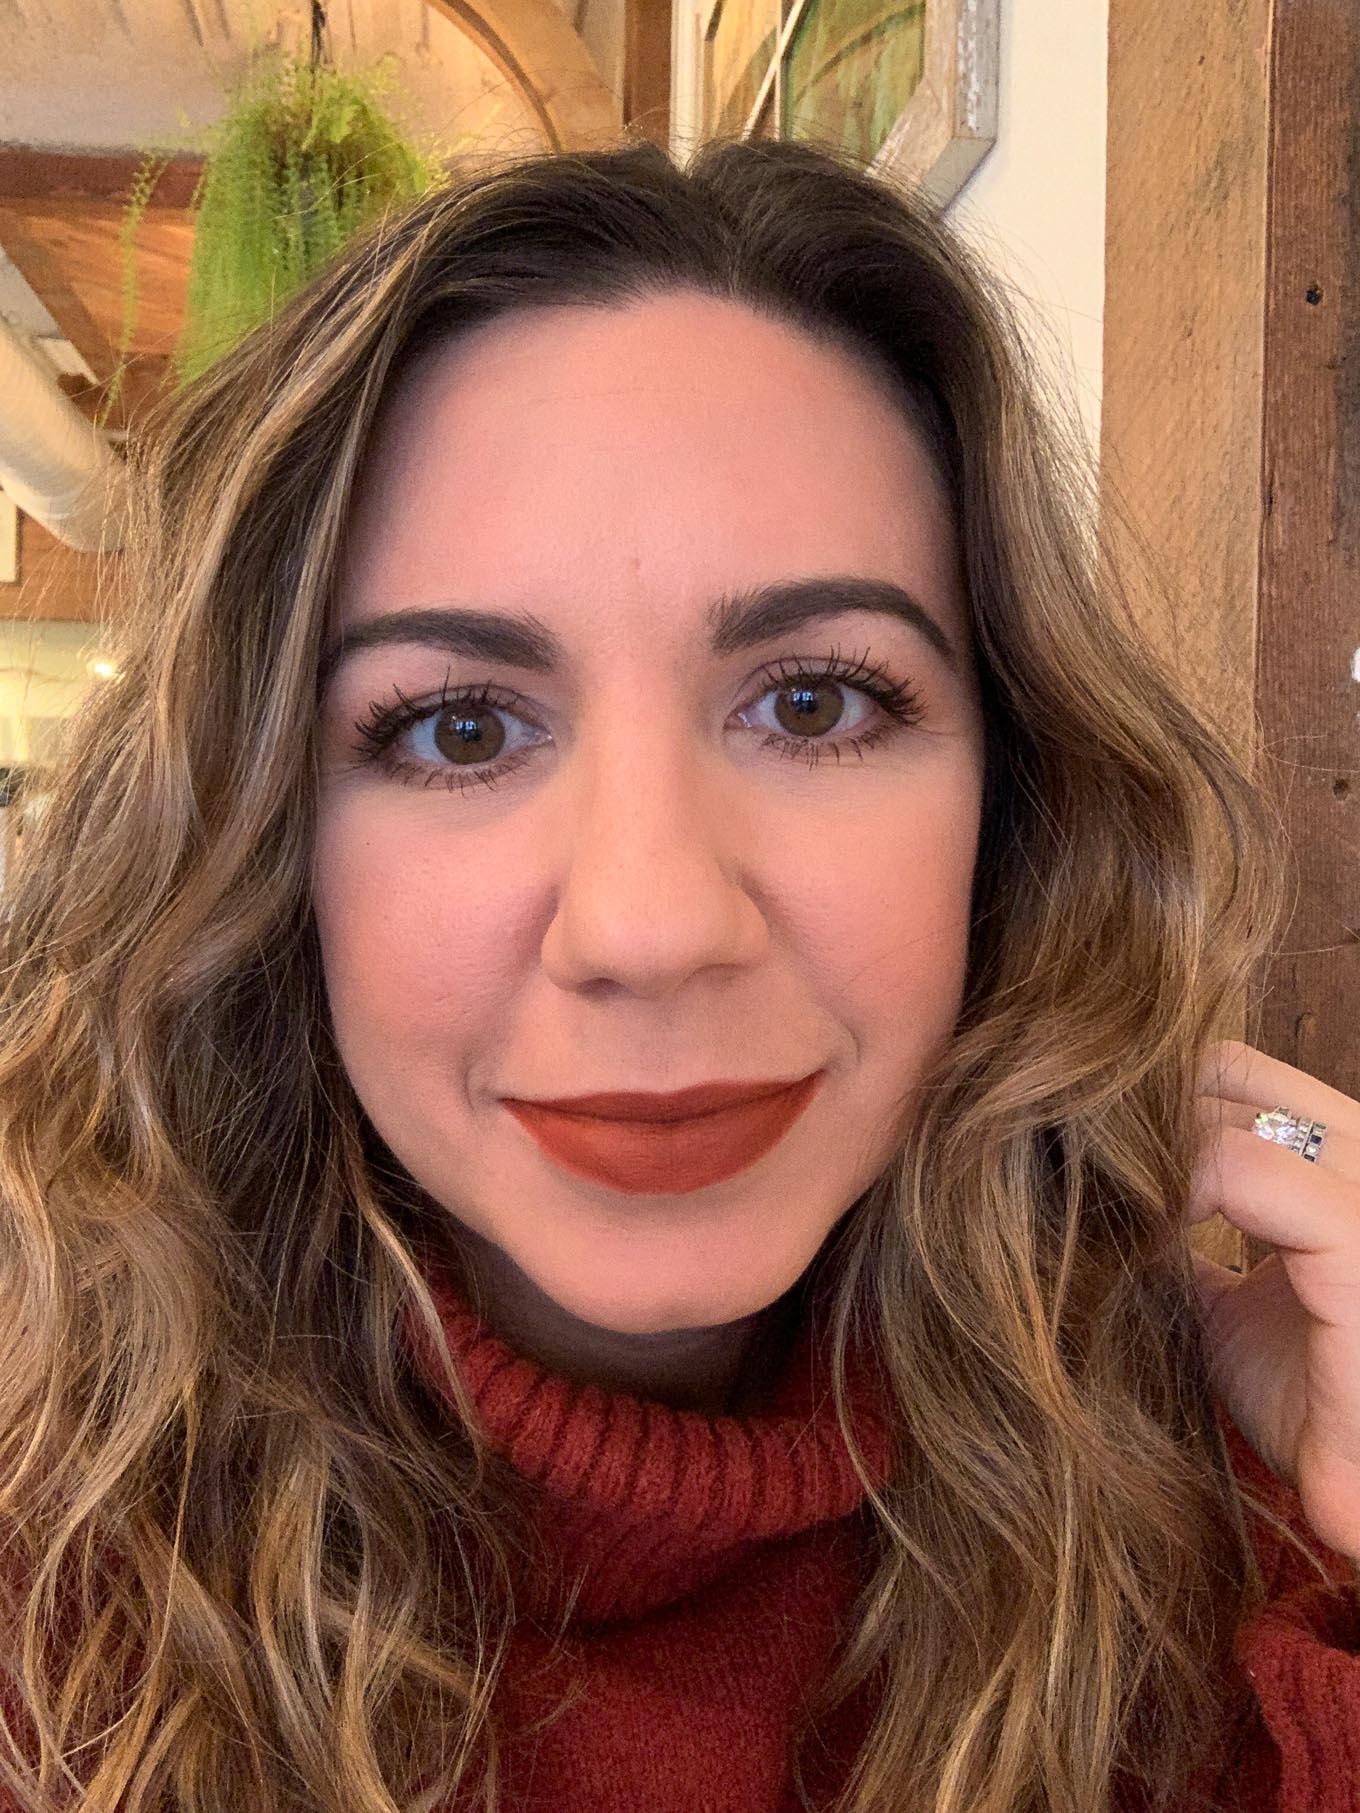 January Lipstick Challenge by popular Chicago life and style blog, Glass of Glam: image of a woman wearing Smashbox matte liquid lipstick in Out Loud.